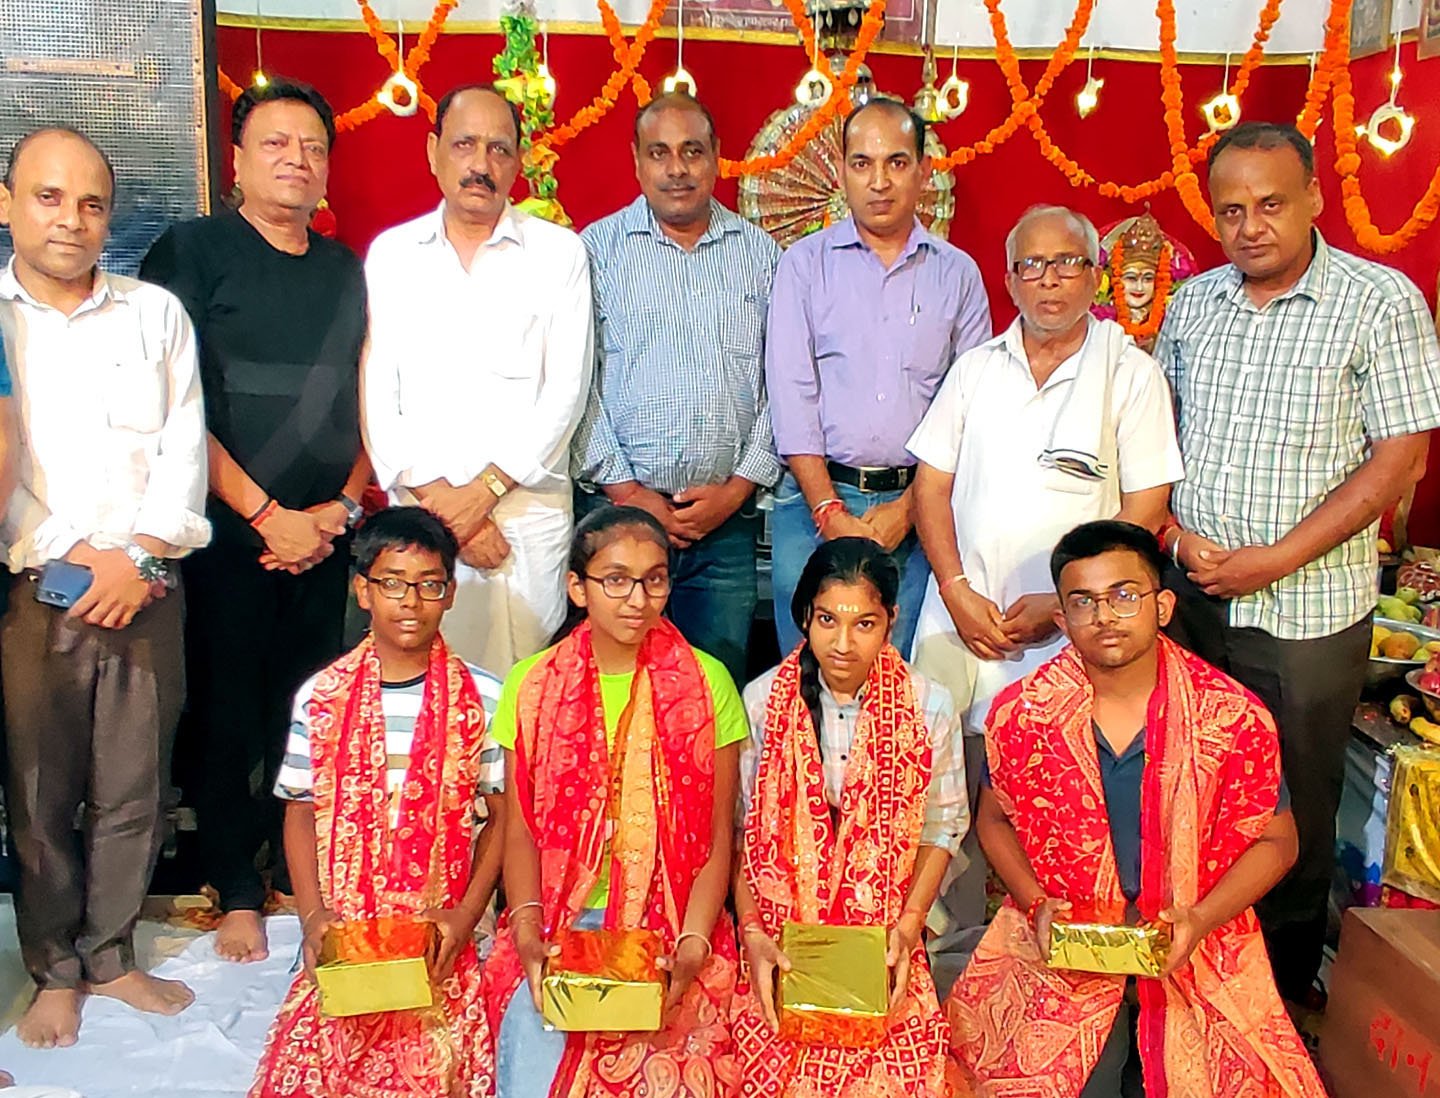 India Book Record Achievers honored at Janmashtami Festival